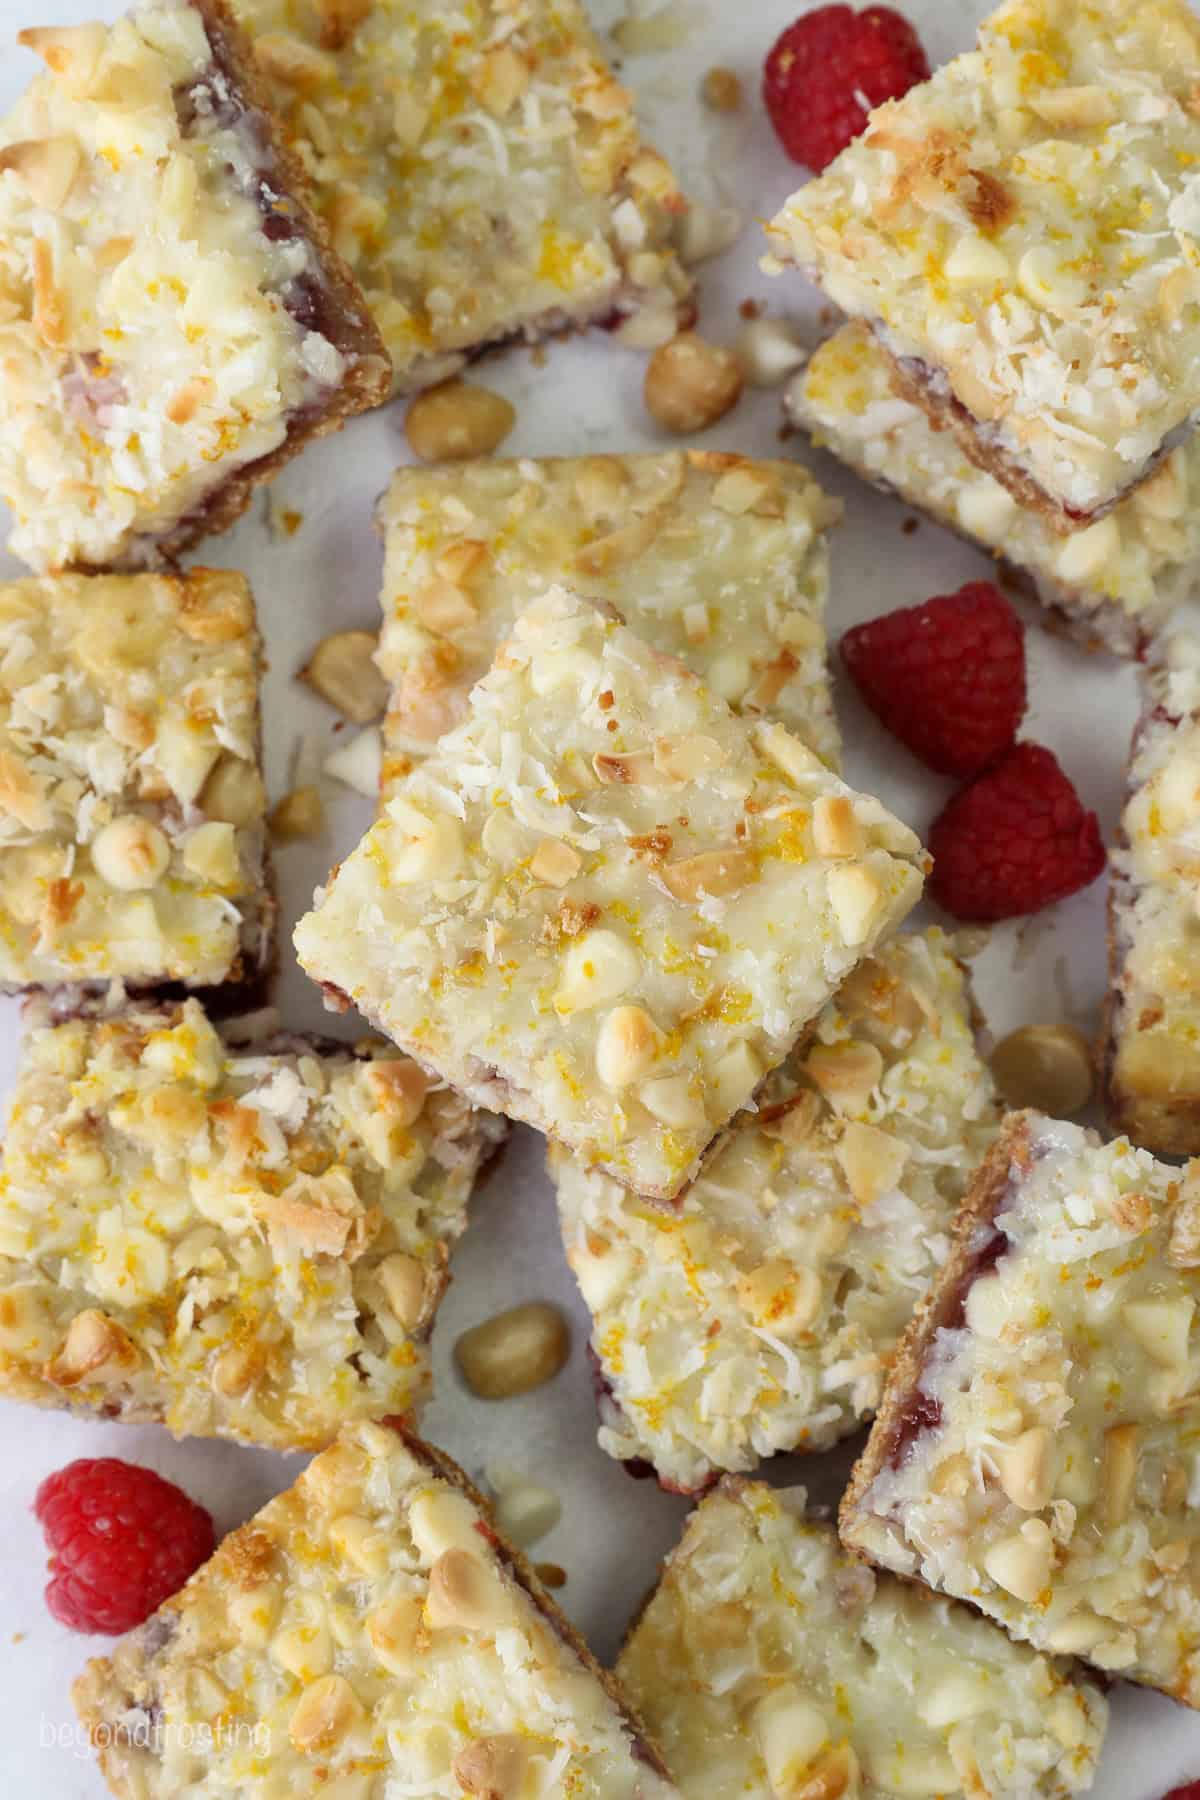 Overhead view of assorted raspberry magic cookie bars next to scattered raspberries.